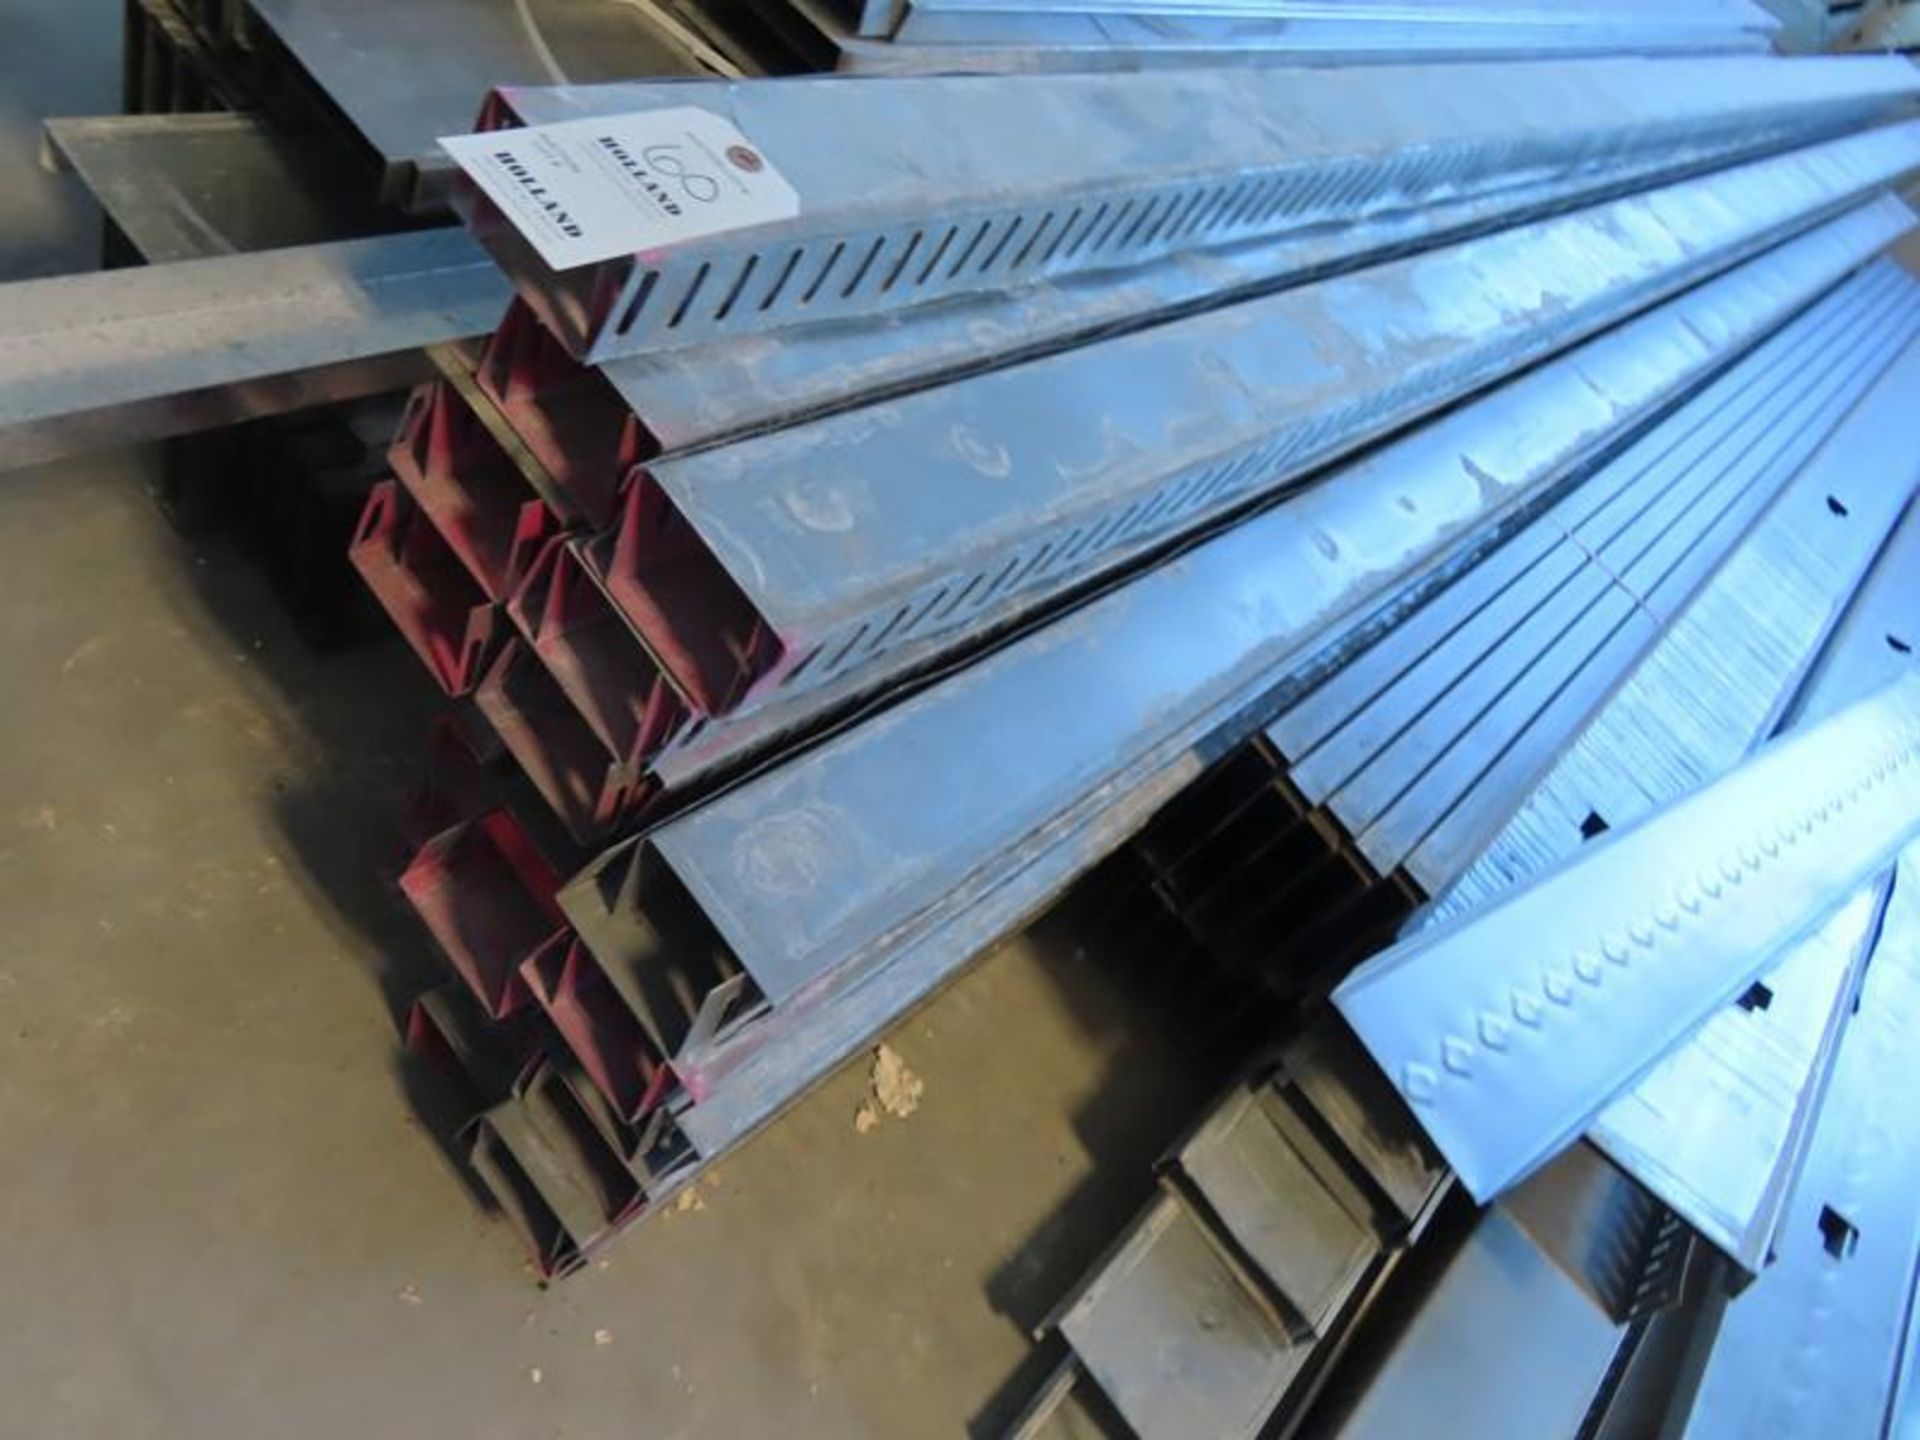 3 LARGE STACKS OF STEEL STUDS, PROSTUD 20Ga 6" 1-1/4" G40 NS (ALL UPSTAIRS) - Image 3 of 10